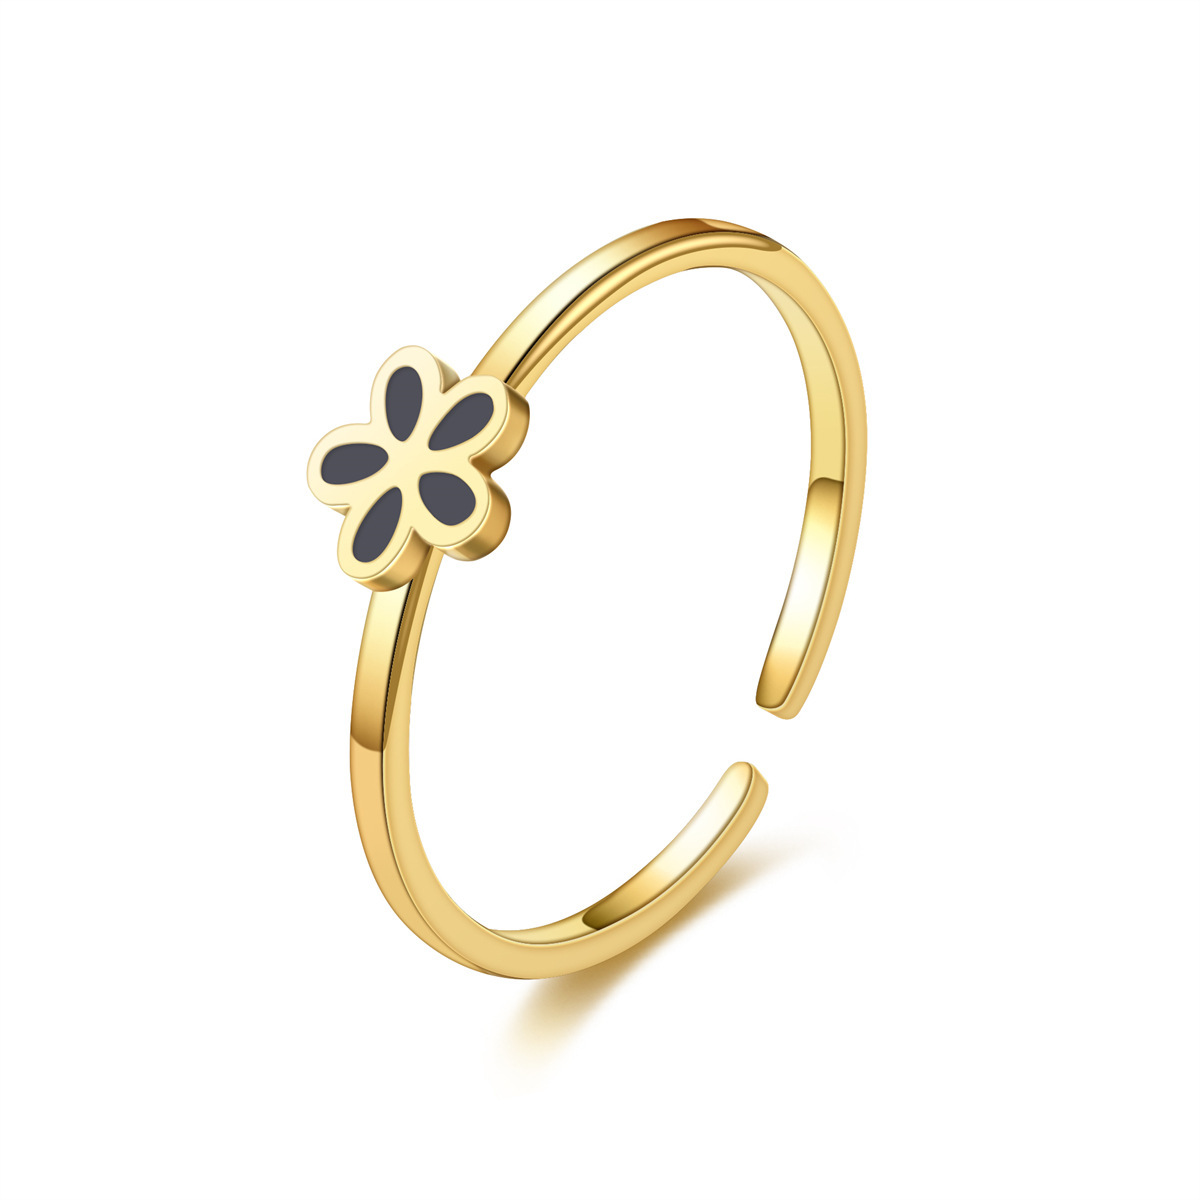 Stainless Steel Daisy Ring